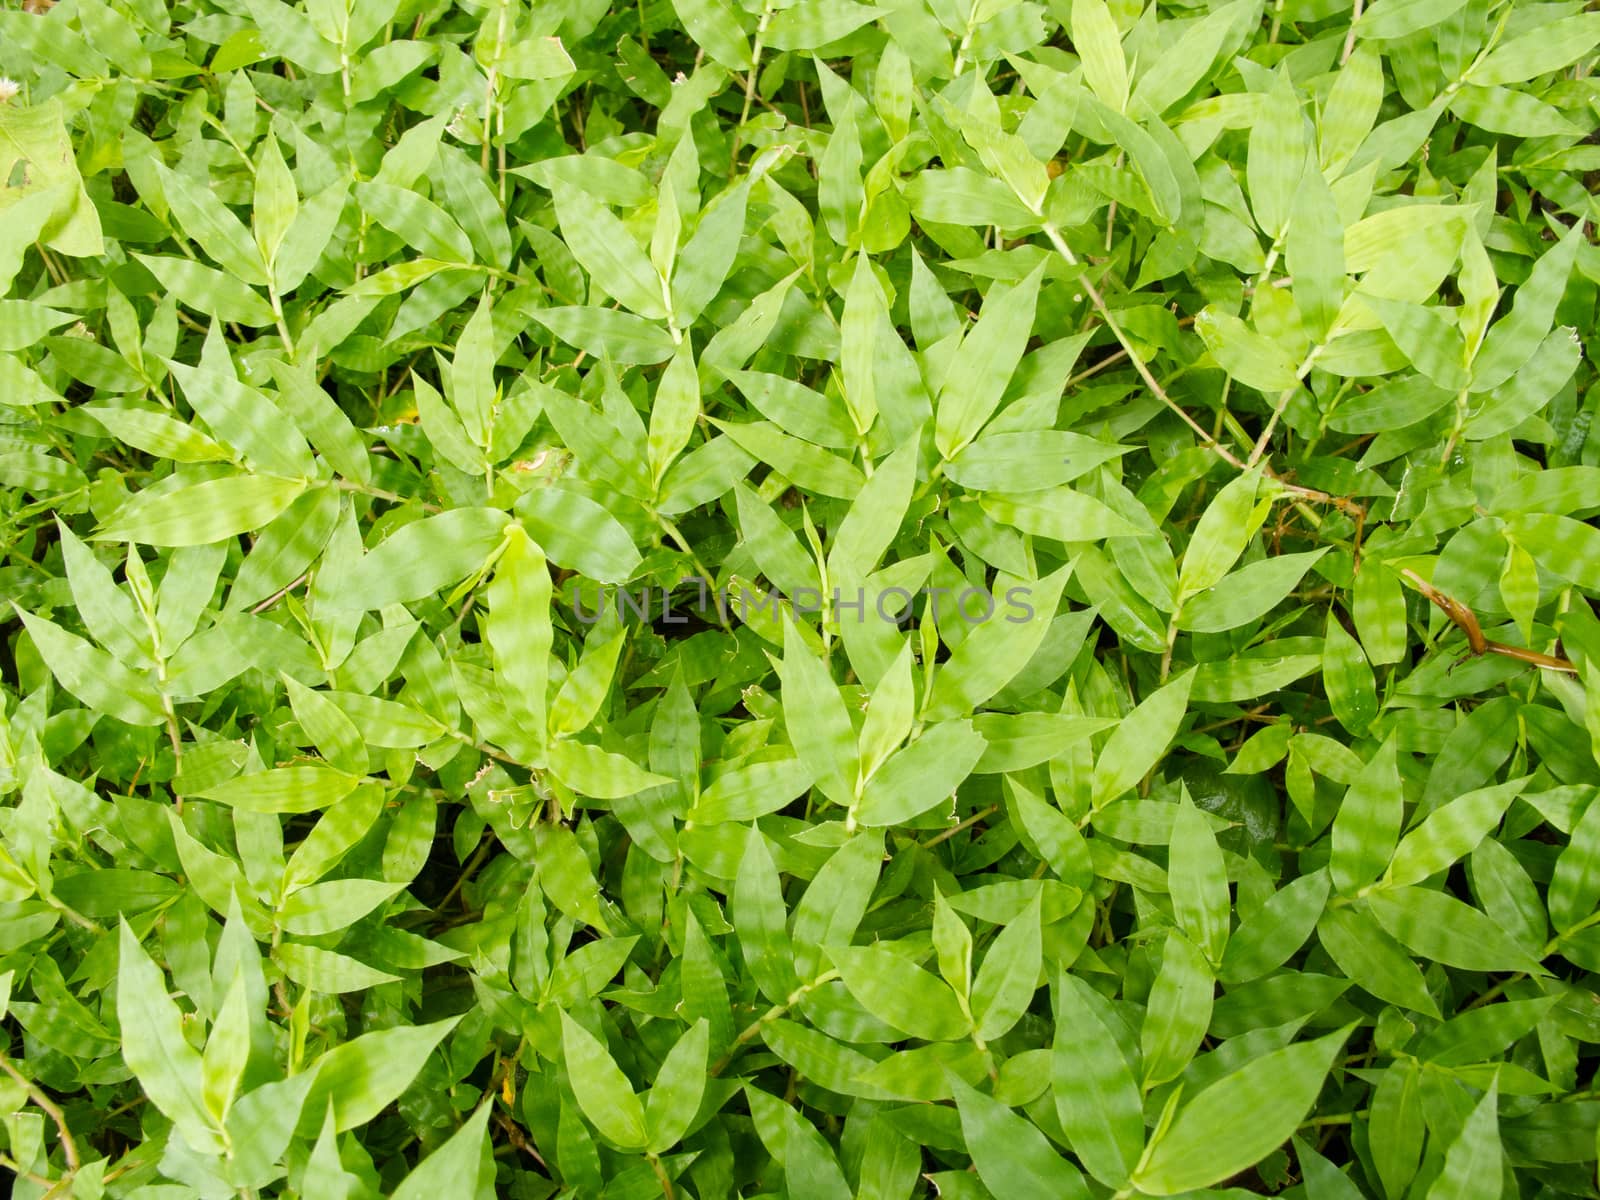 Pattern of green weed grasses as background